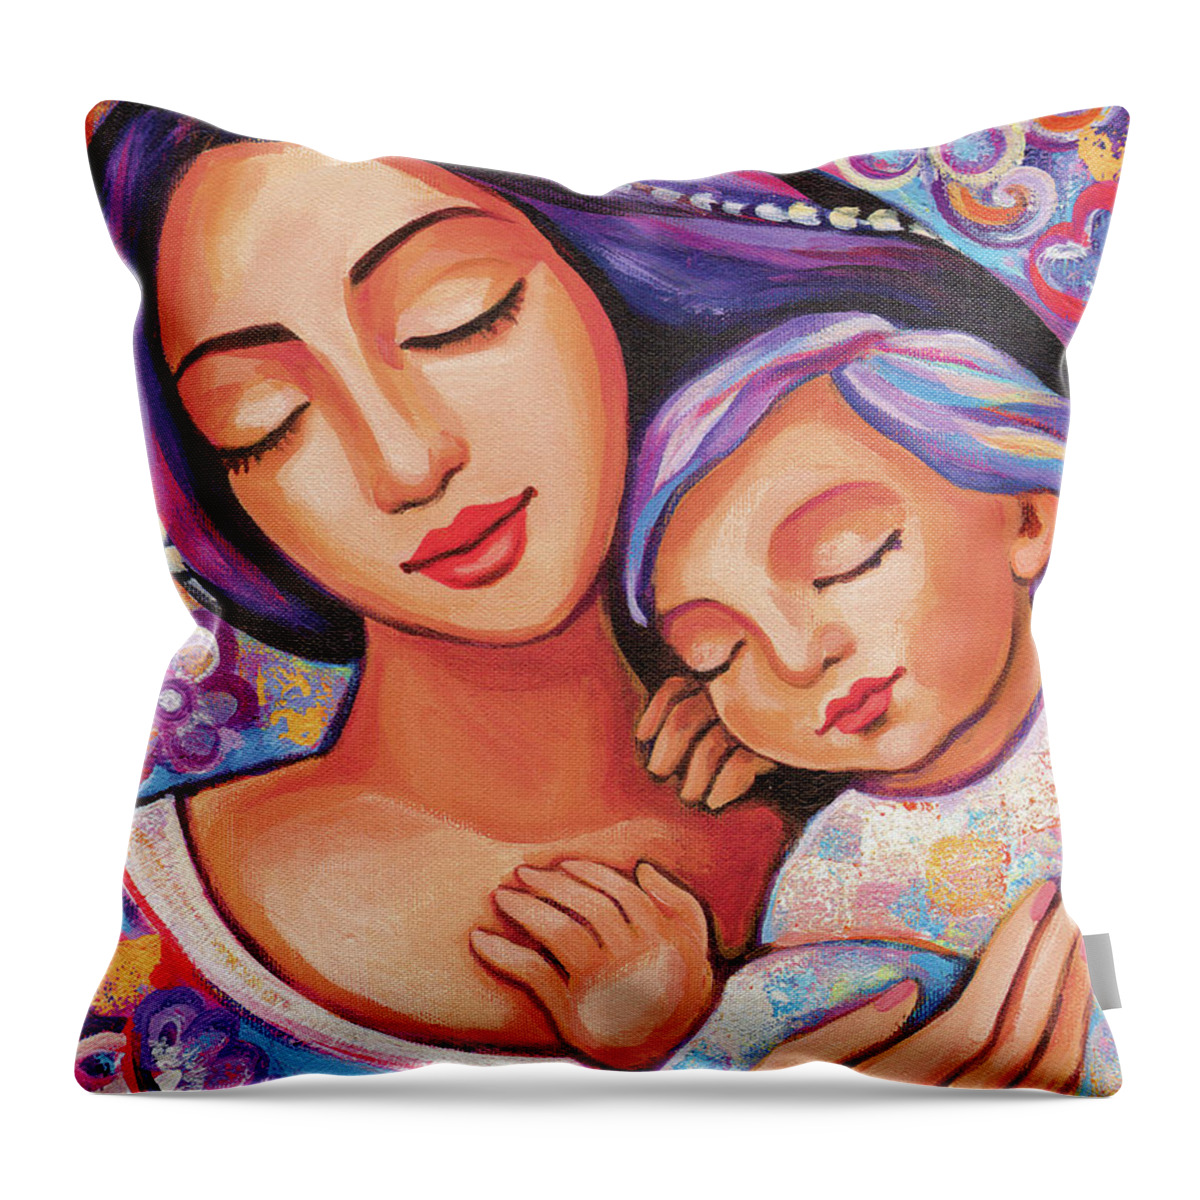 Mother And Child Throw Pillow featuring the painting Dreaming Together by Eva Campbell